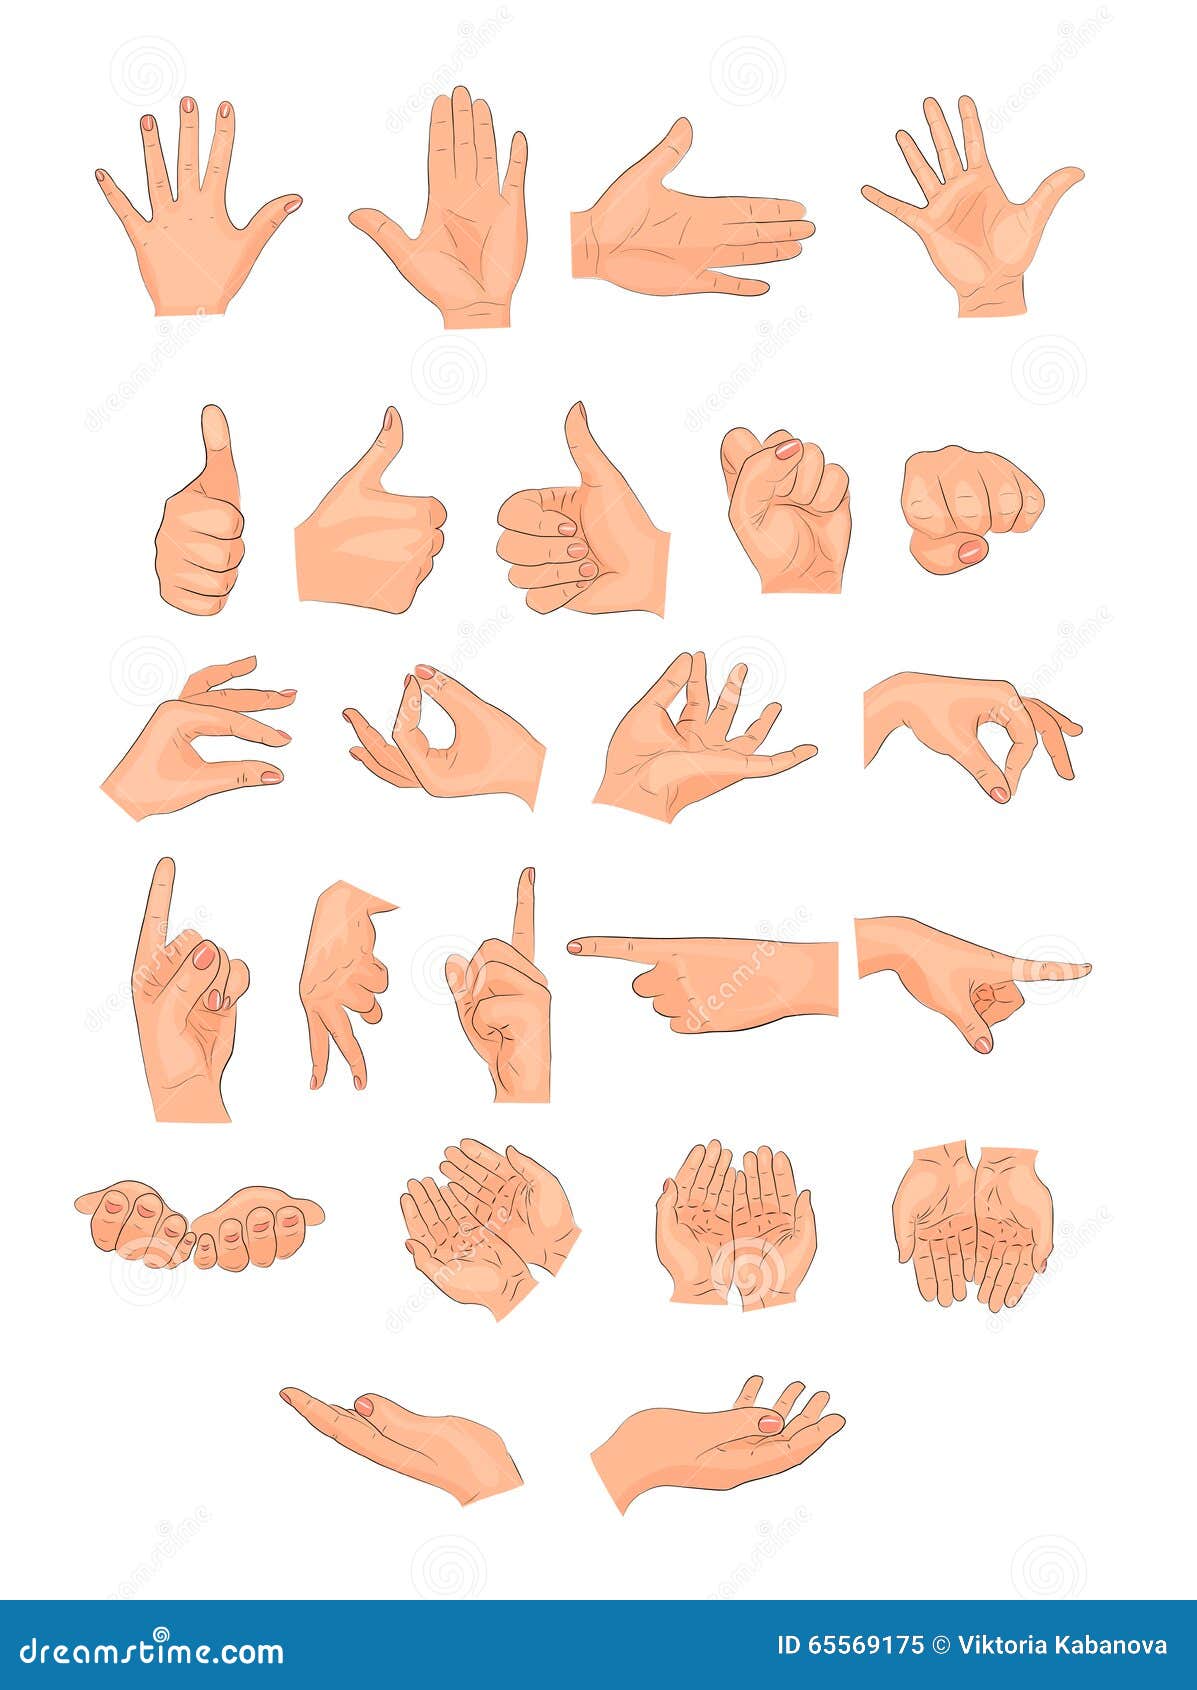 the different positions of the hands